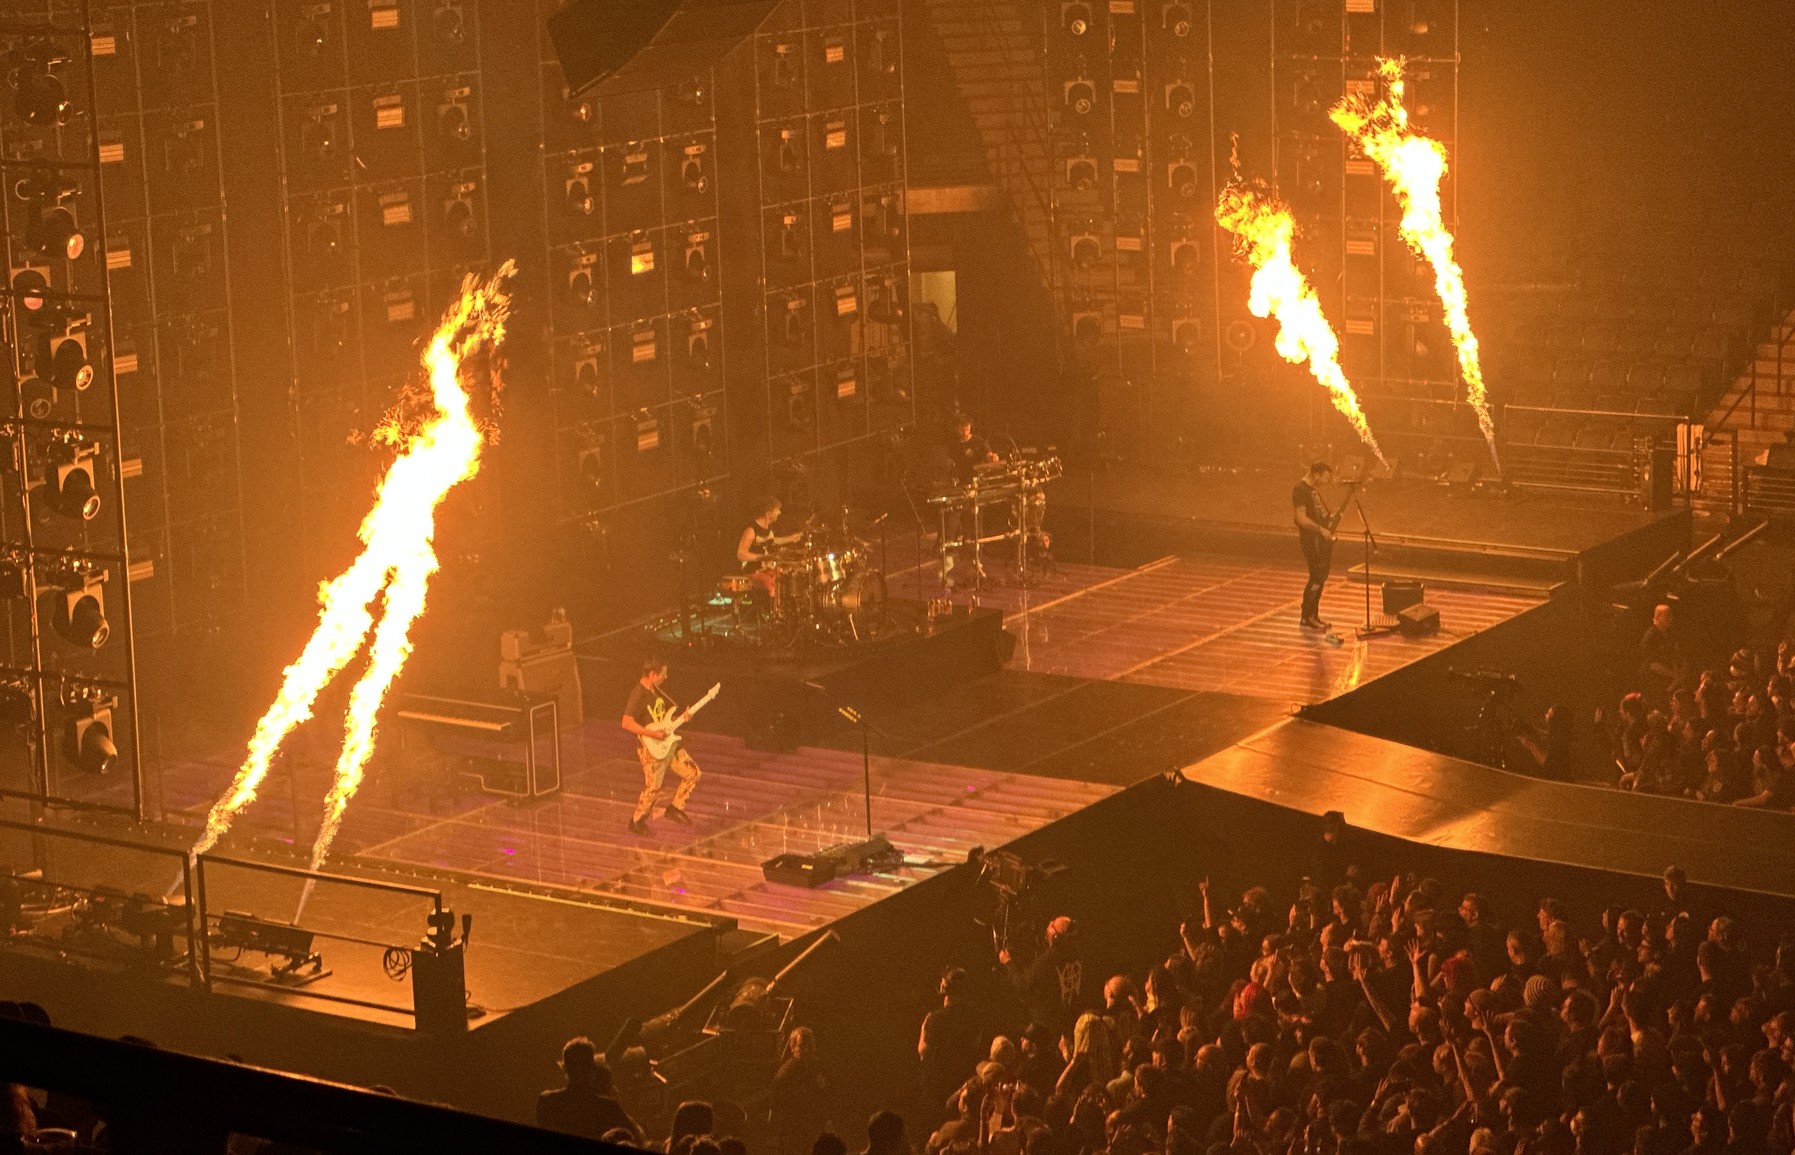 Muse playing with four large flames shooting across the stage